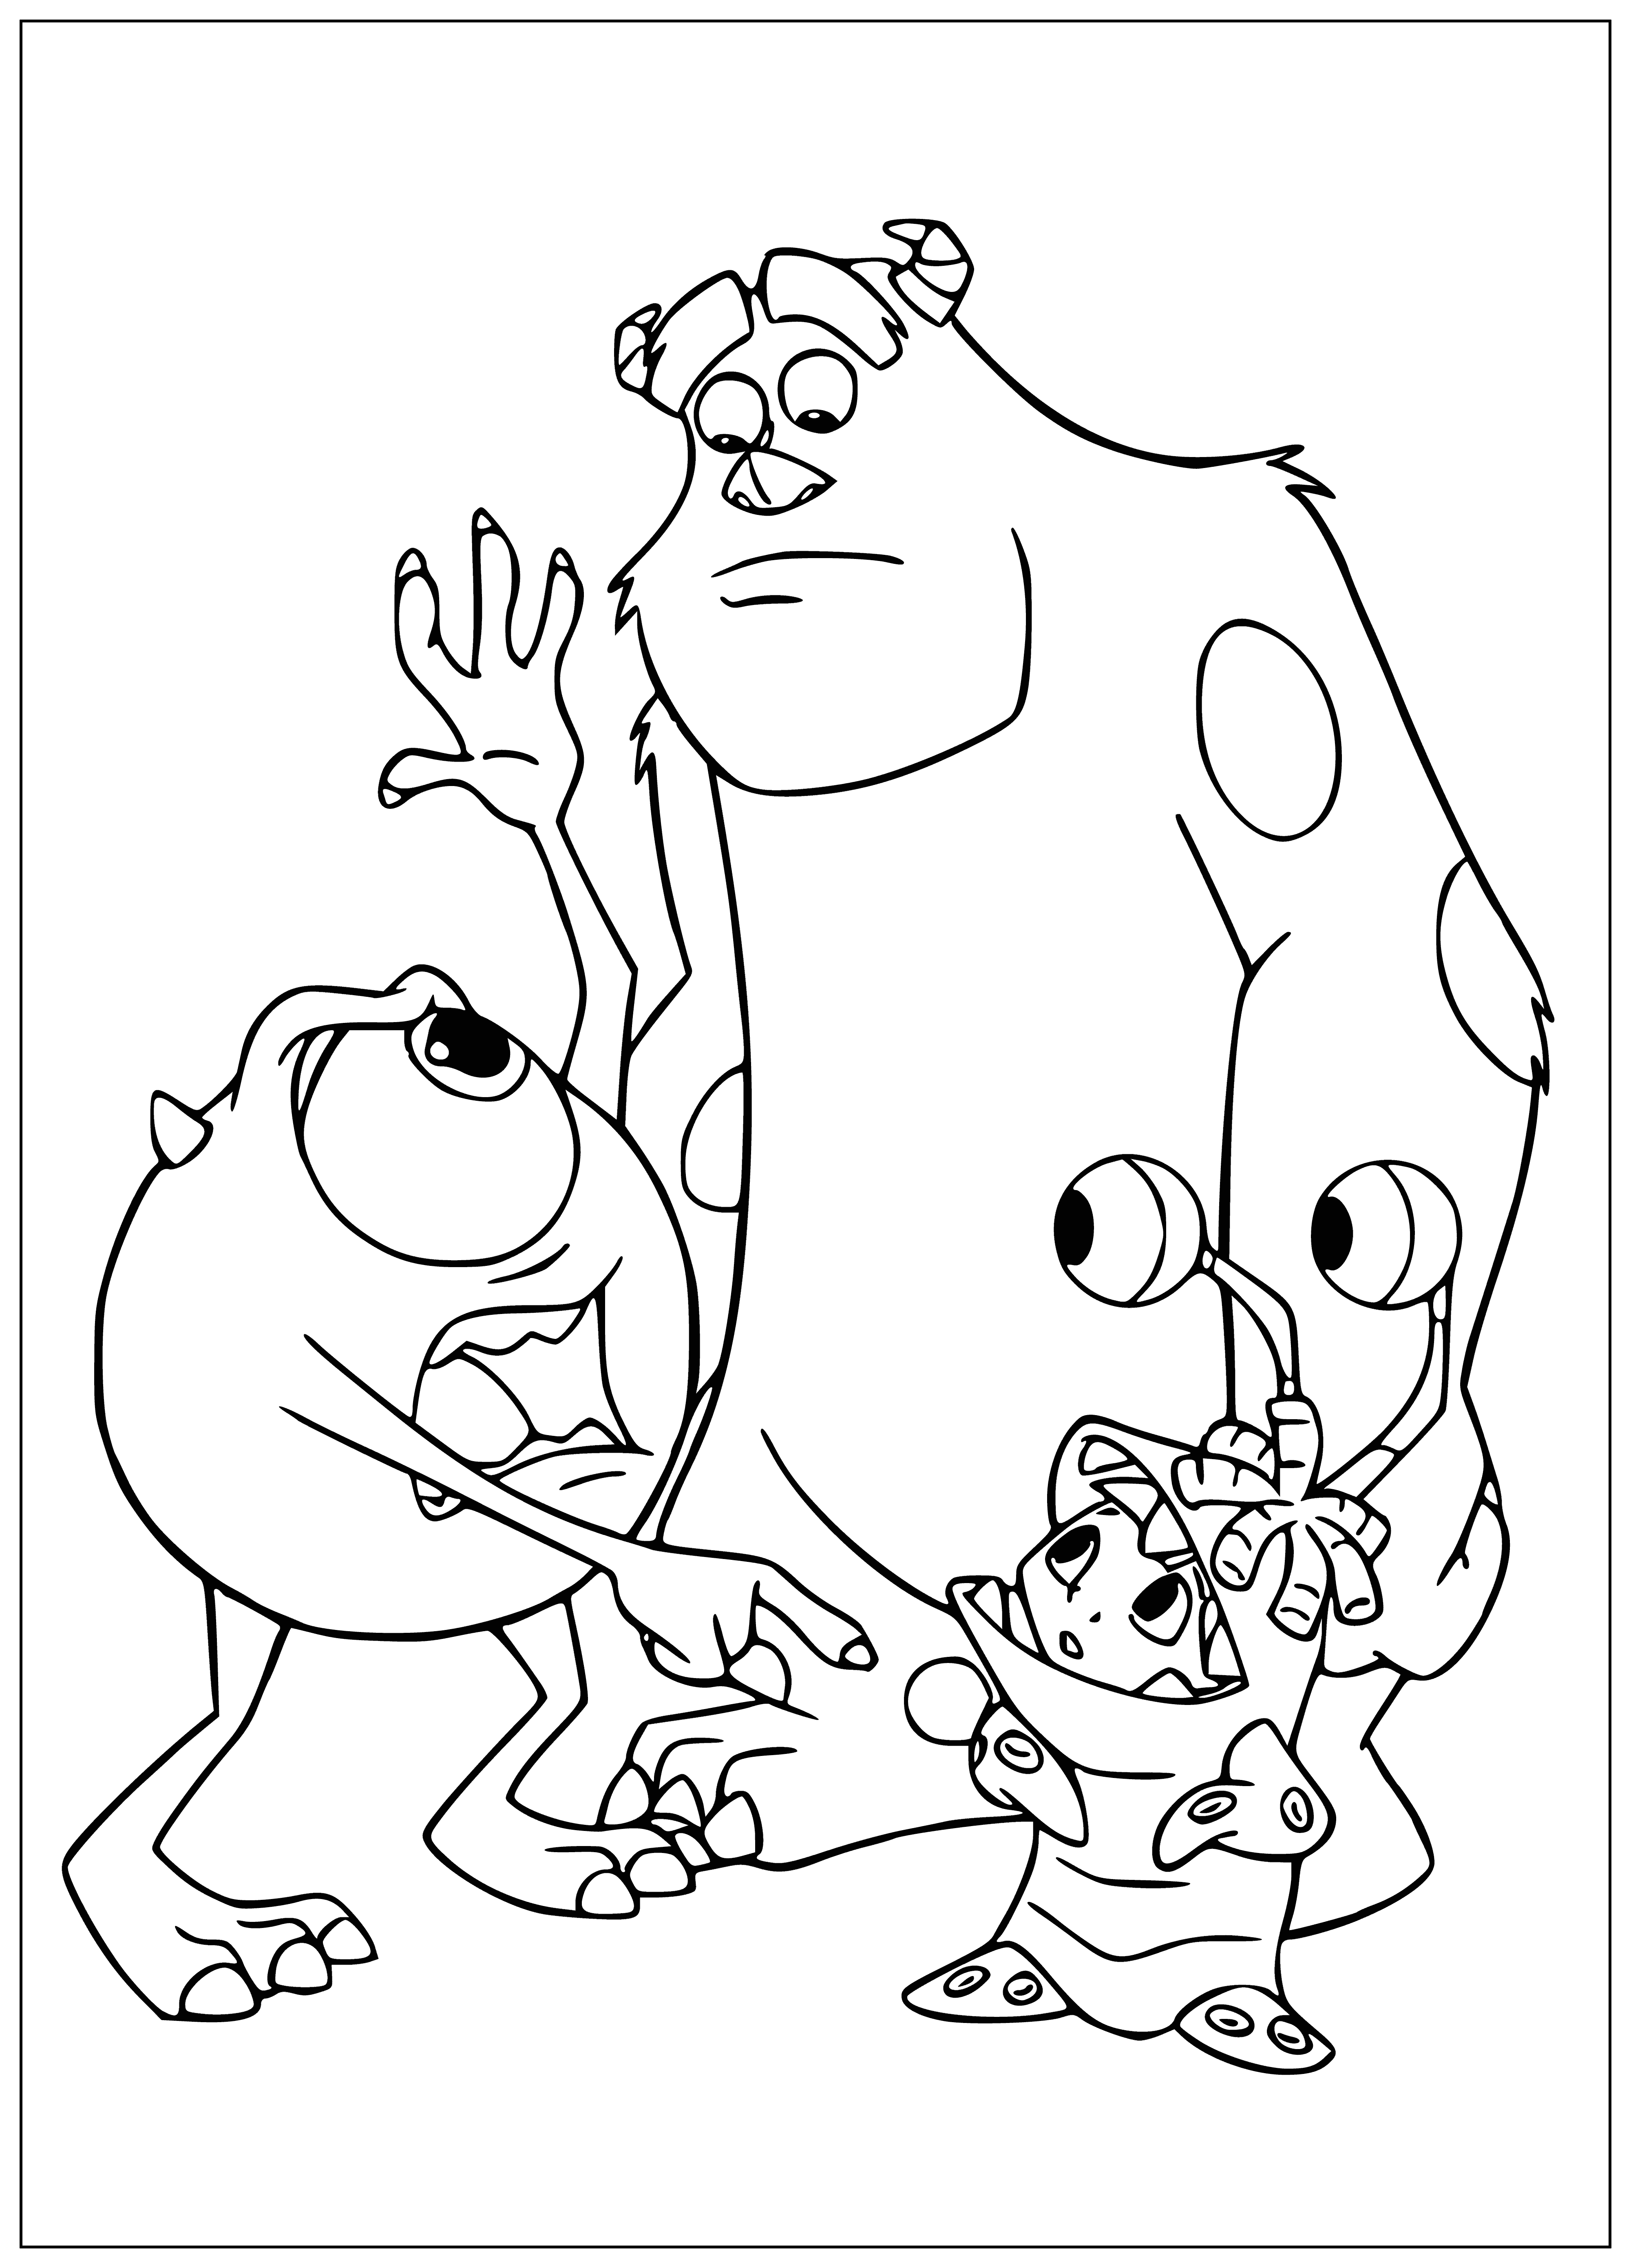 You can't leave her! coloring page